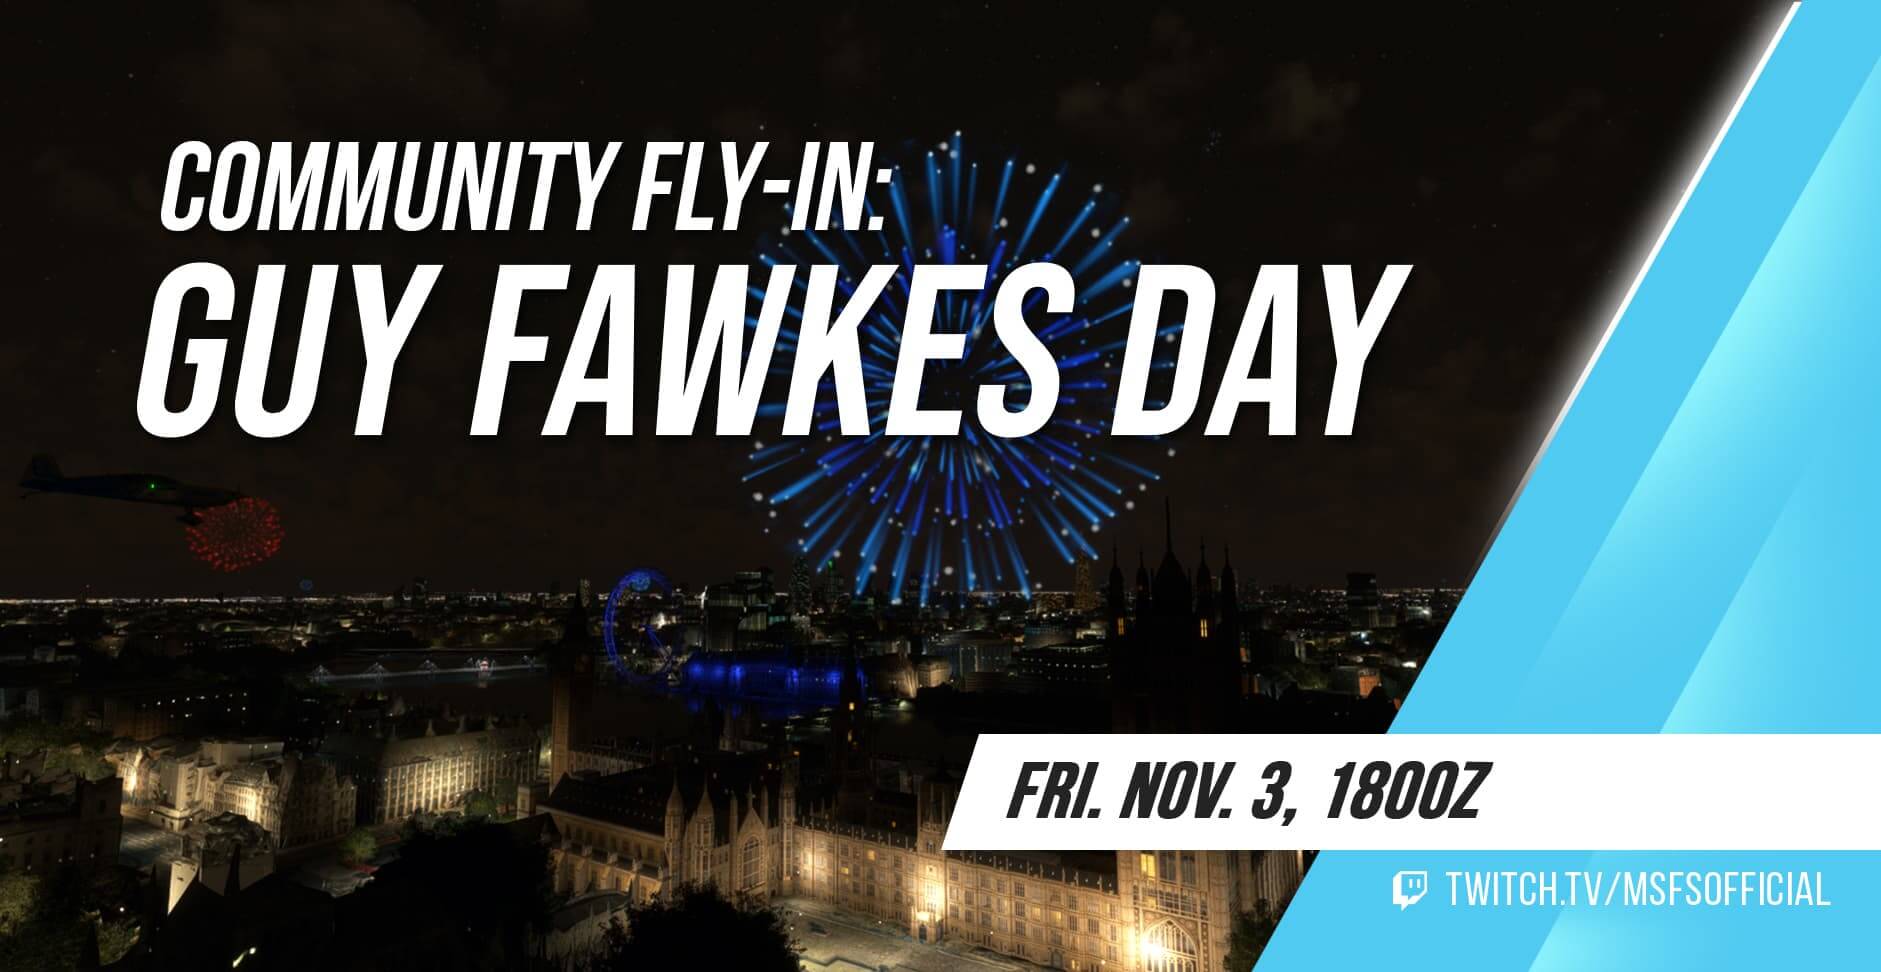 Community Fly-In: Guy Falkes Day. Friday November 3rd at 18:00z on www.twitch.tv/msfsofficial